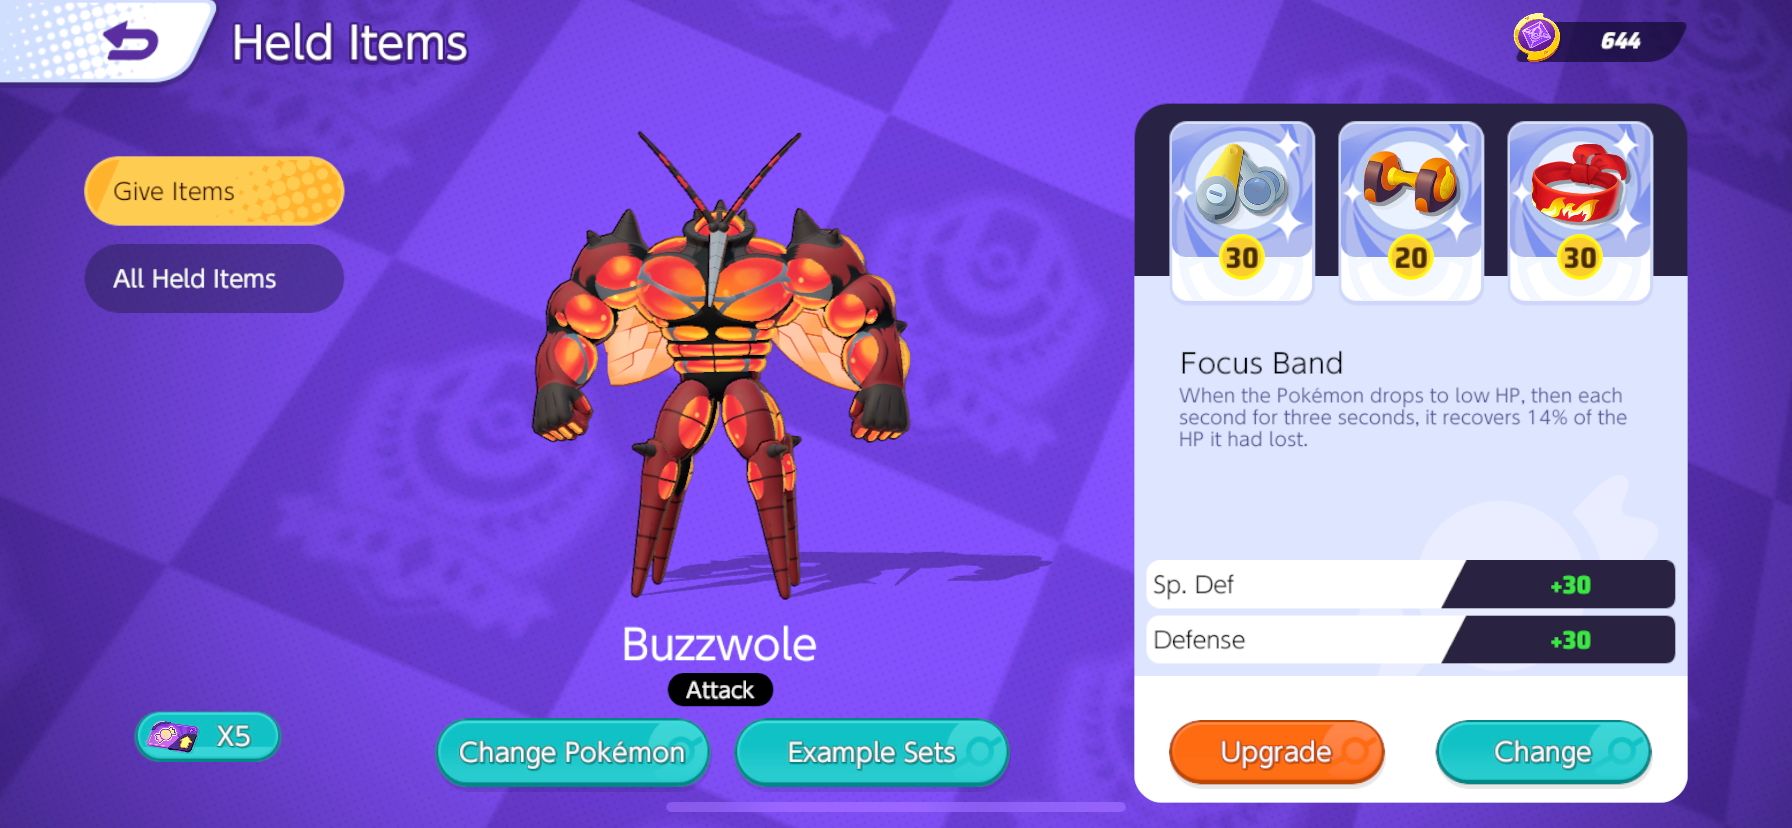 Buzzwole Held Item selection screen from Pokemon Unite, with Scope Lens, Attack Weight, and Focus Band selected